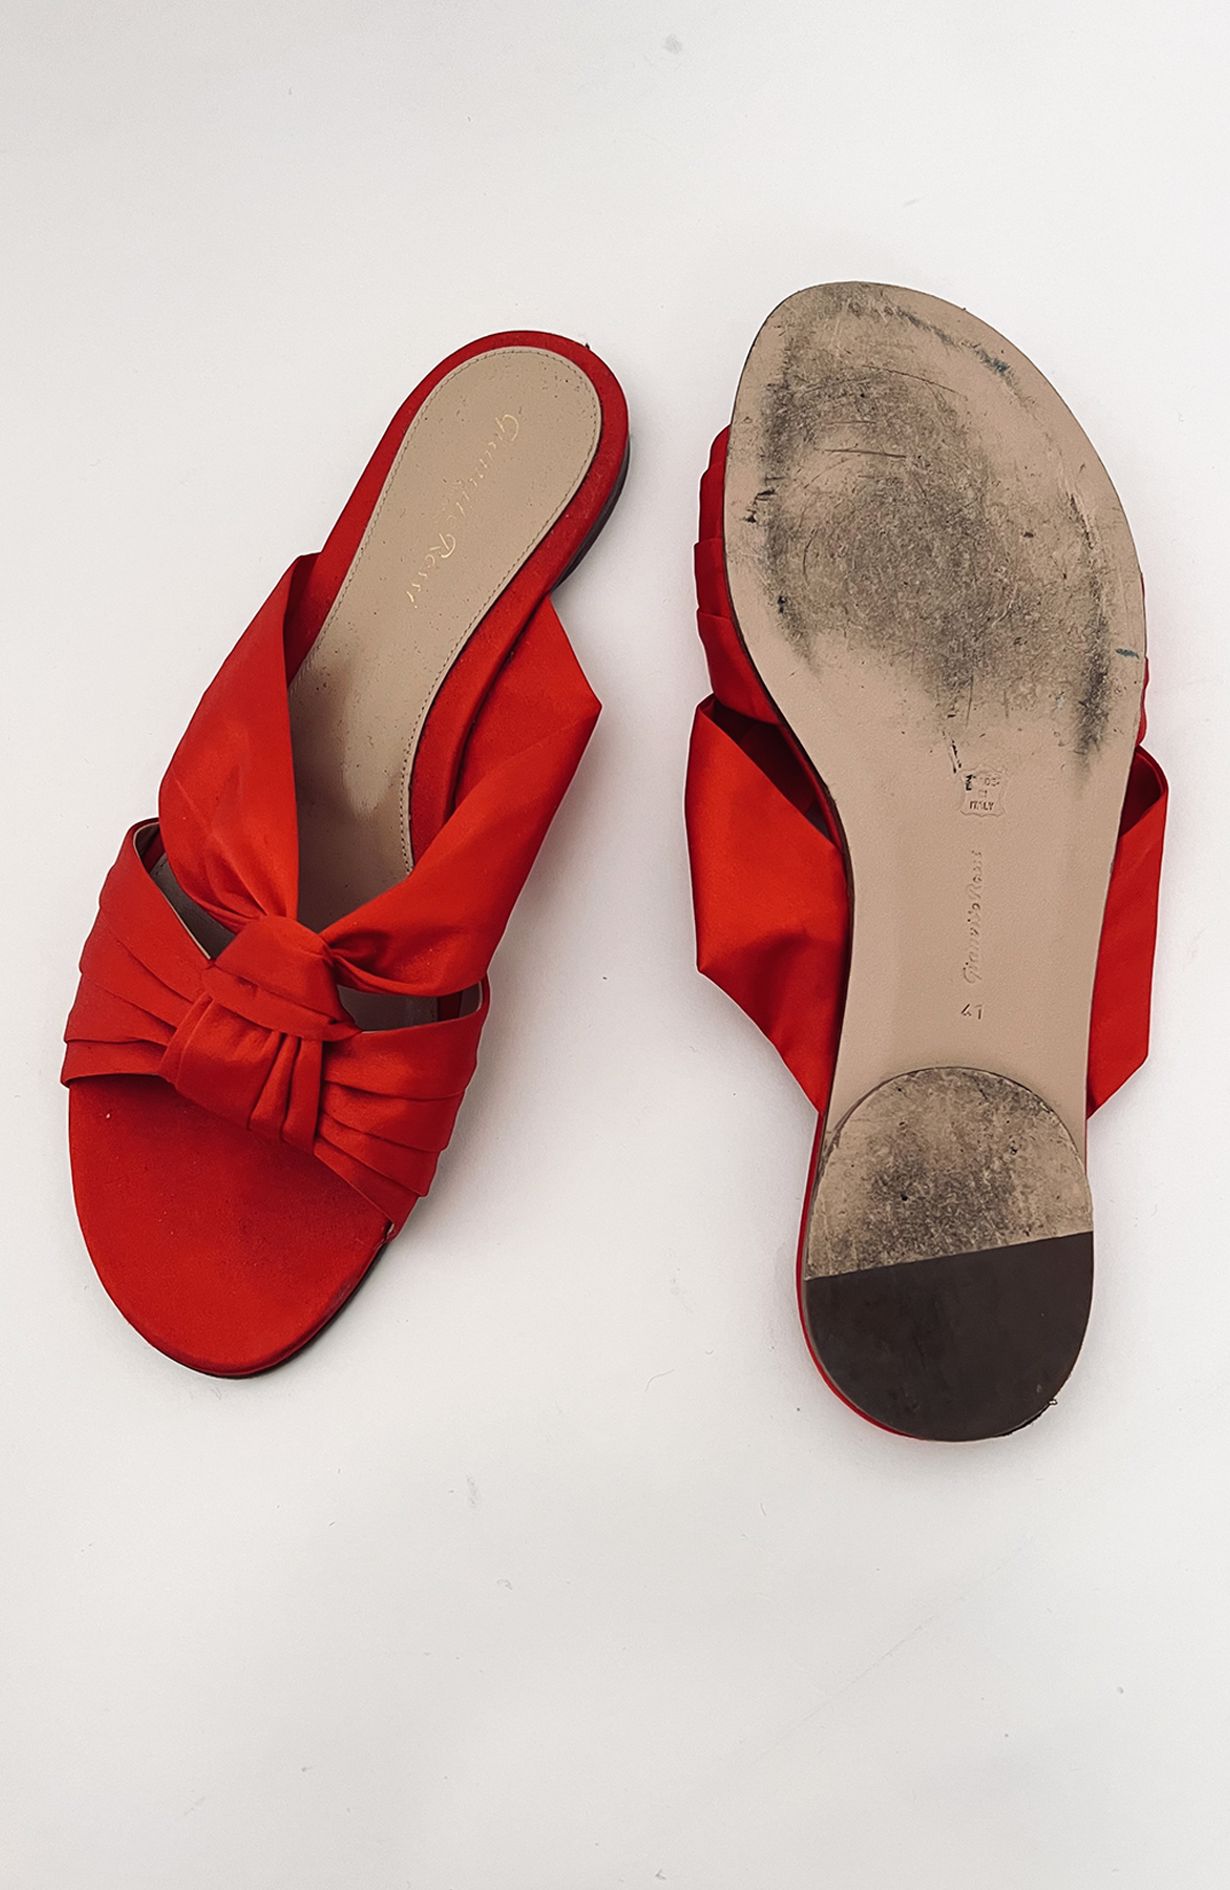 Gianvito Rossi Red Sandals - Size 41